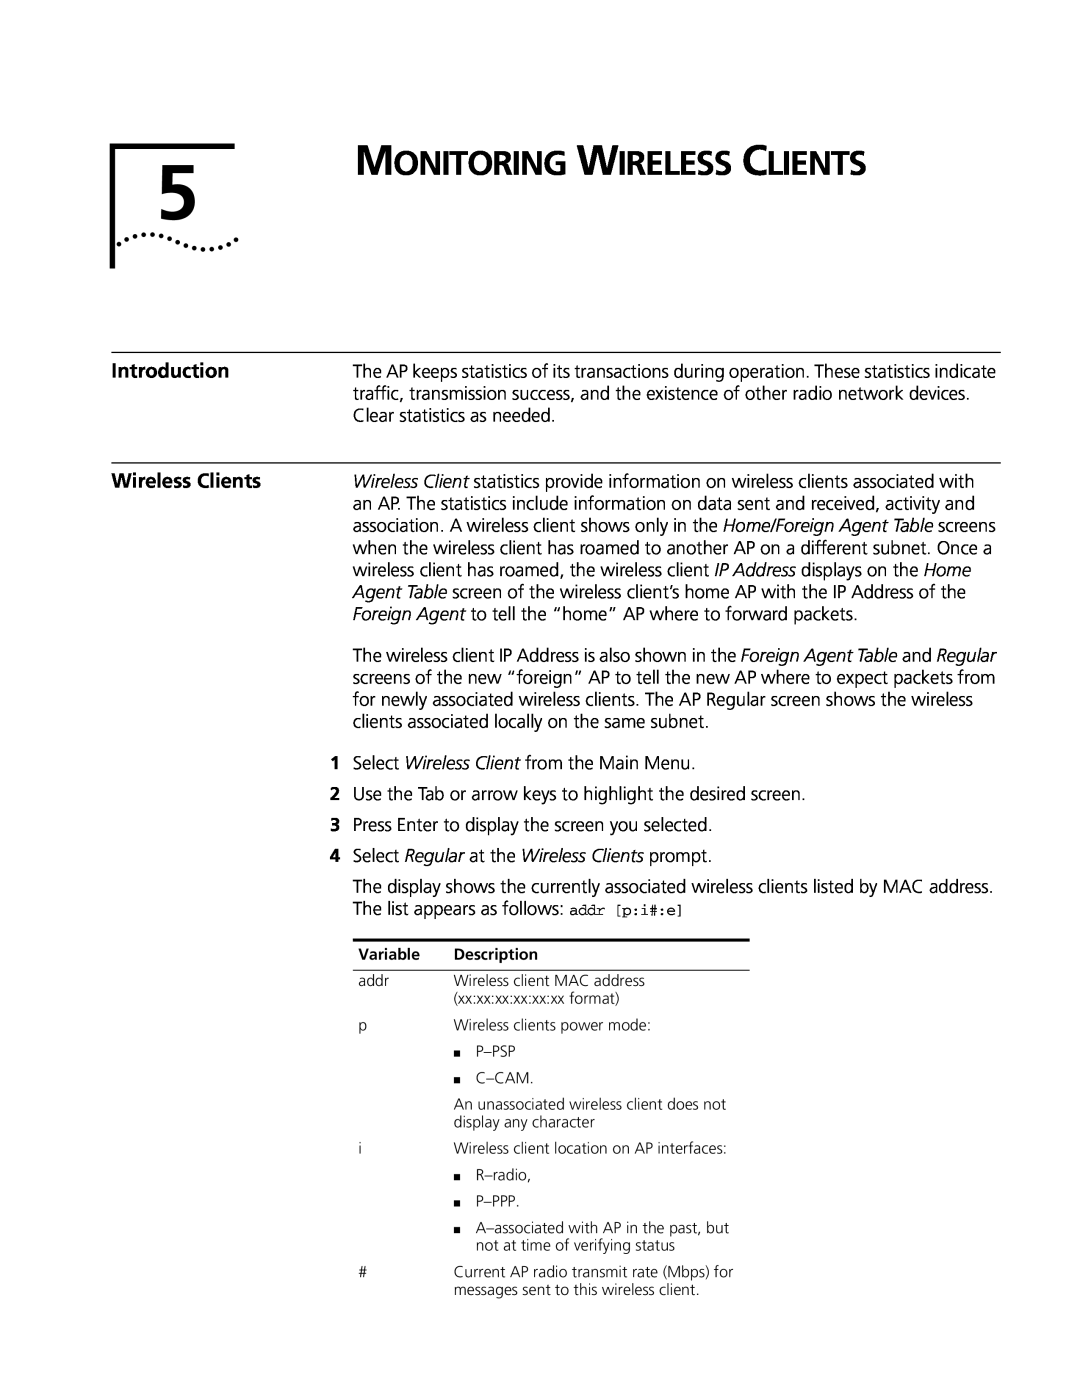 Cabletron Systems 3Com manual Monitoring Wireless Clients, Select Regular at the Wireless Clients prompt, Introduction 